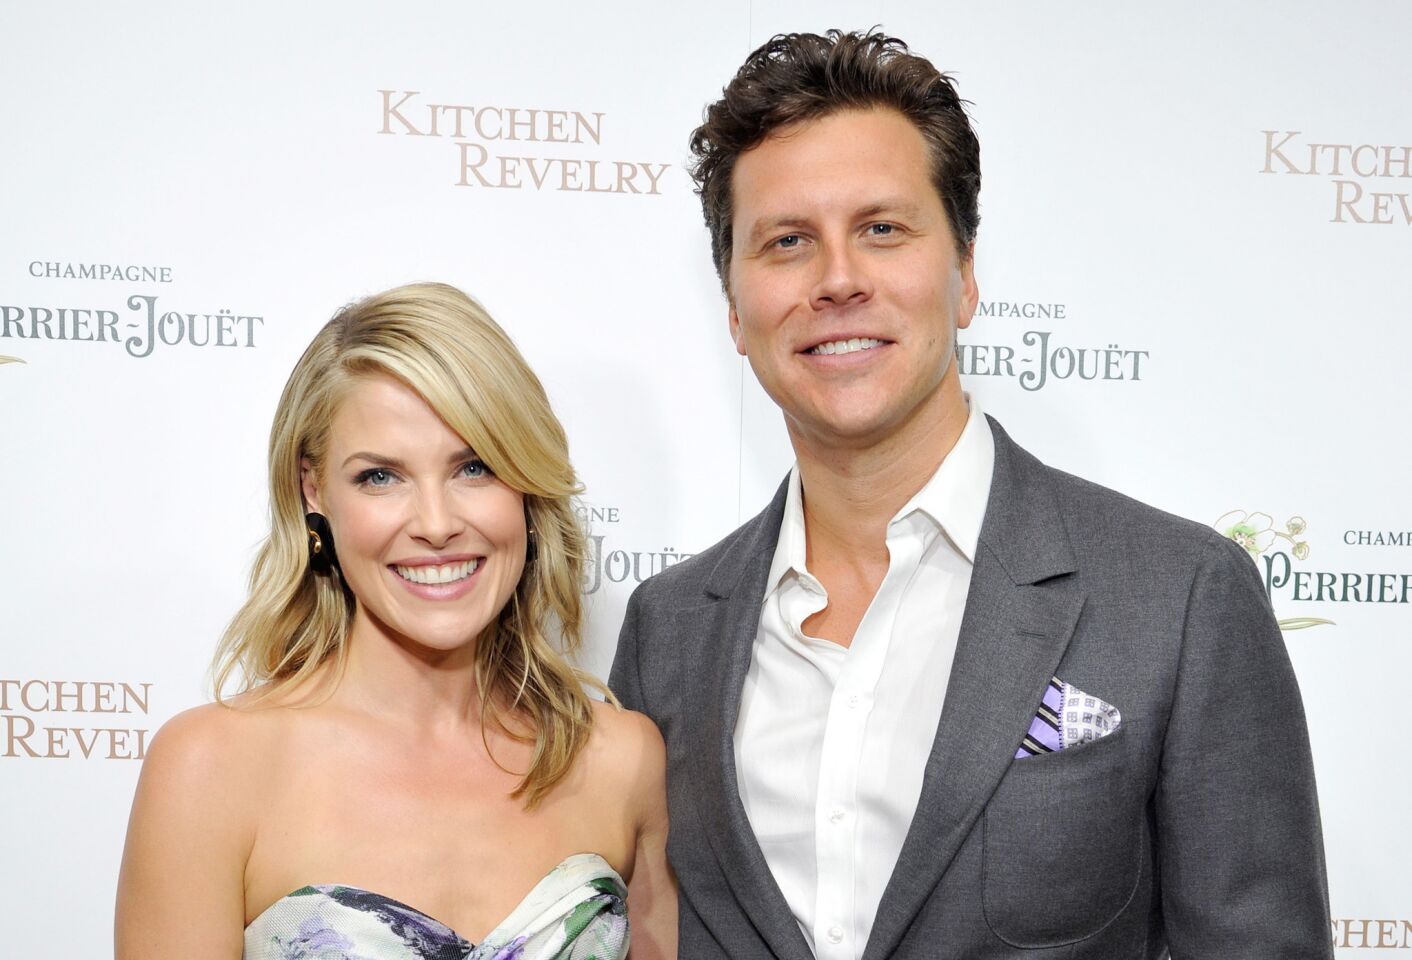 Actress Ali Larter and her husband, Hayes MacArthur, are now second-time parents to a daughter, Vivienne Margaret MacArthur. The bundle of joy joins the couple's toddler son, Theodore Hayes.